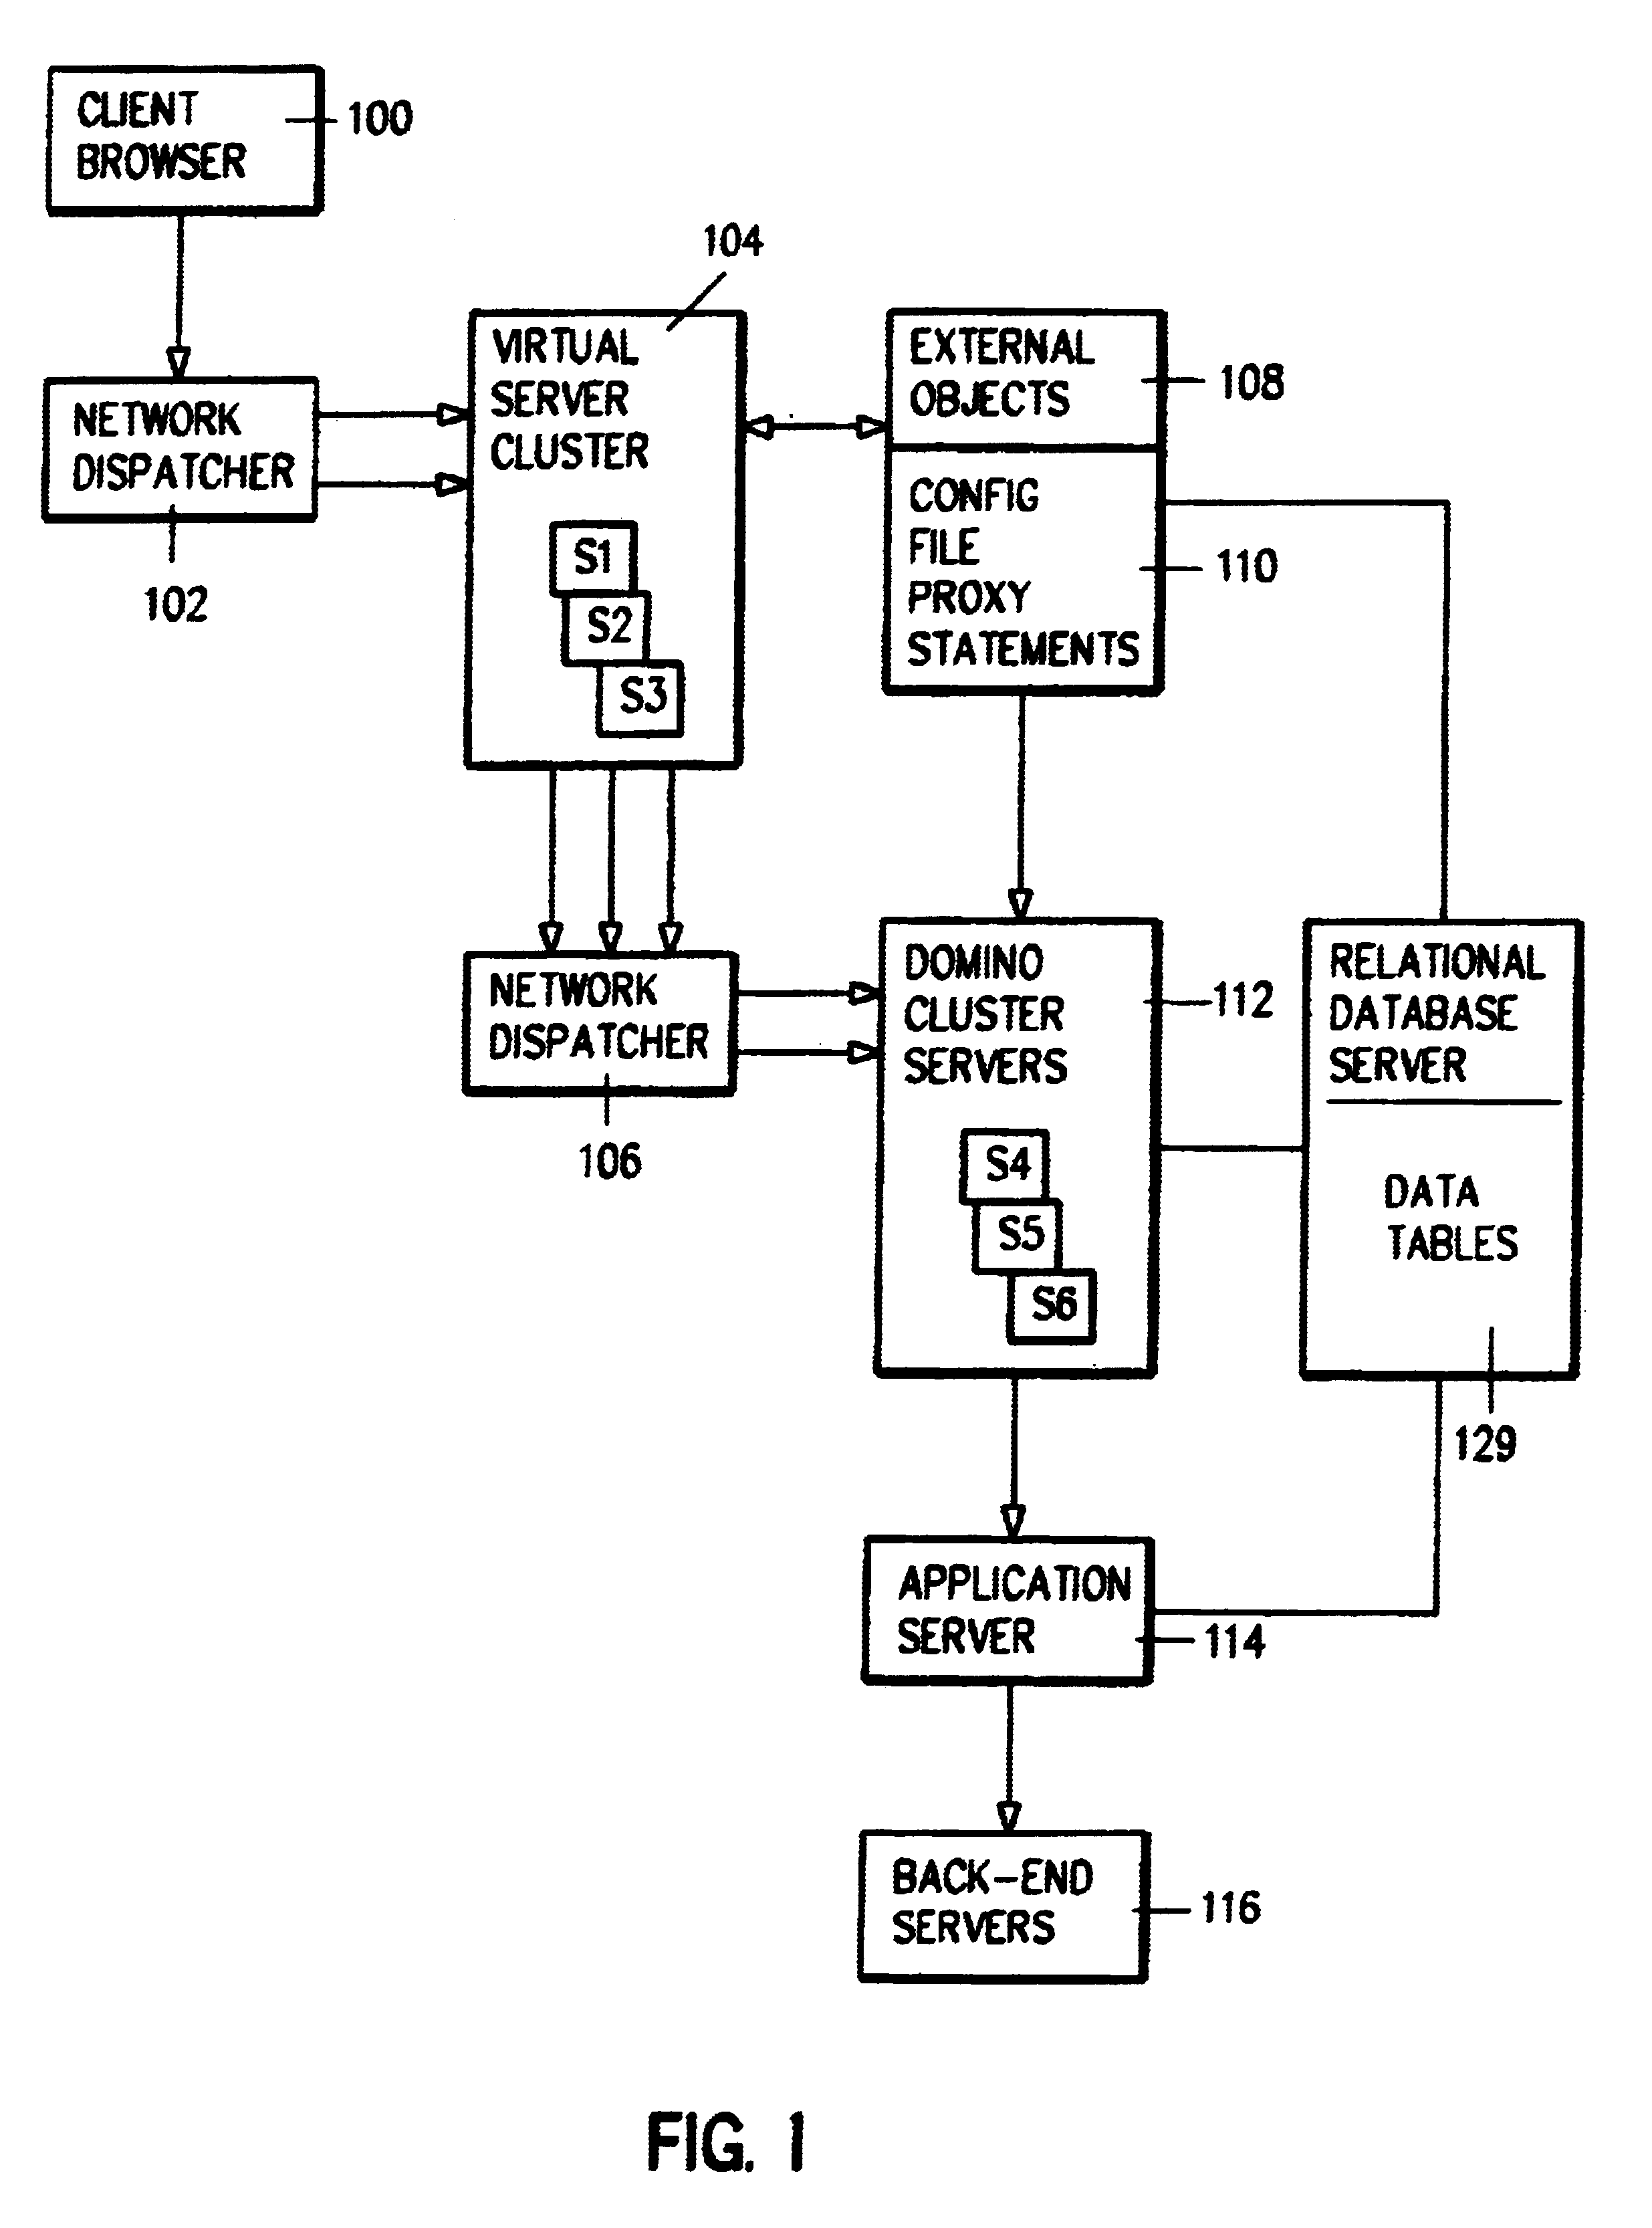 System and method for data transfer with respect to external applications